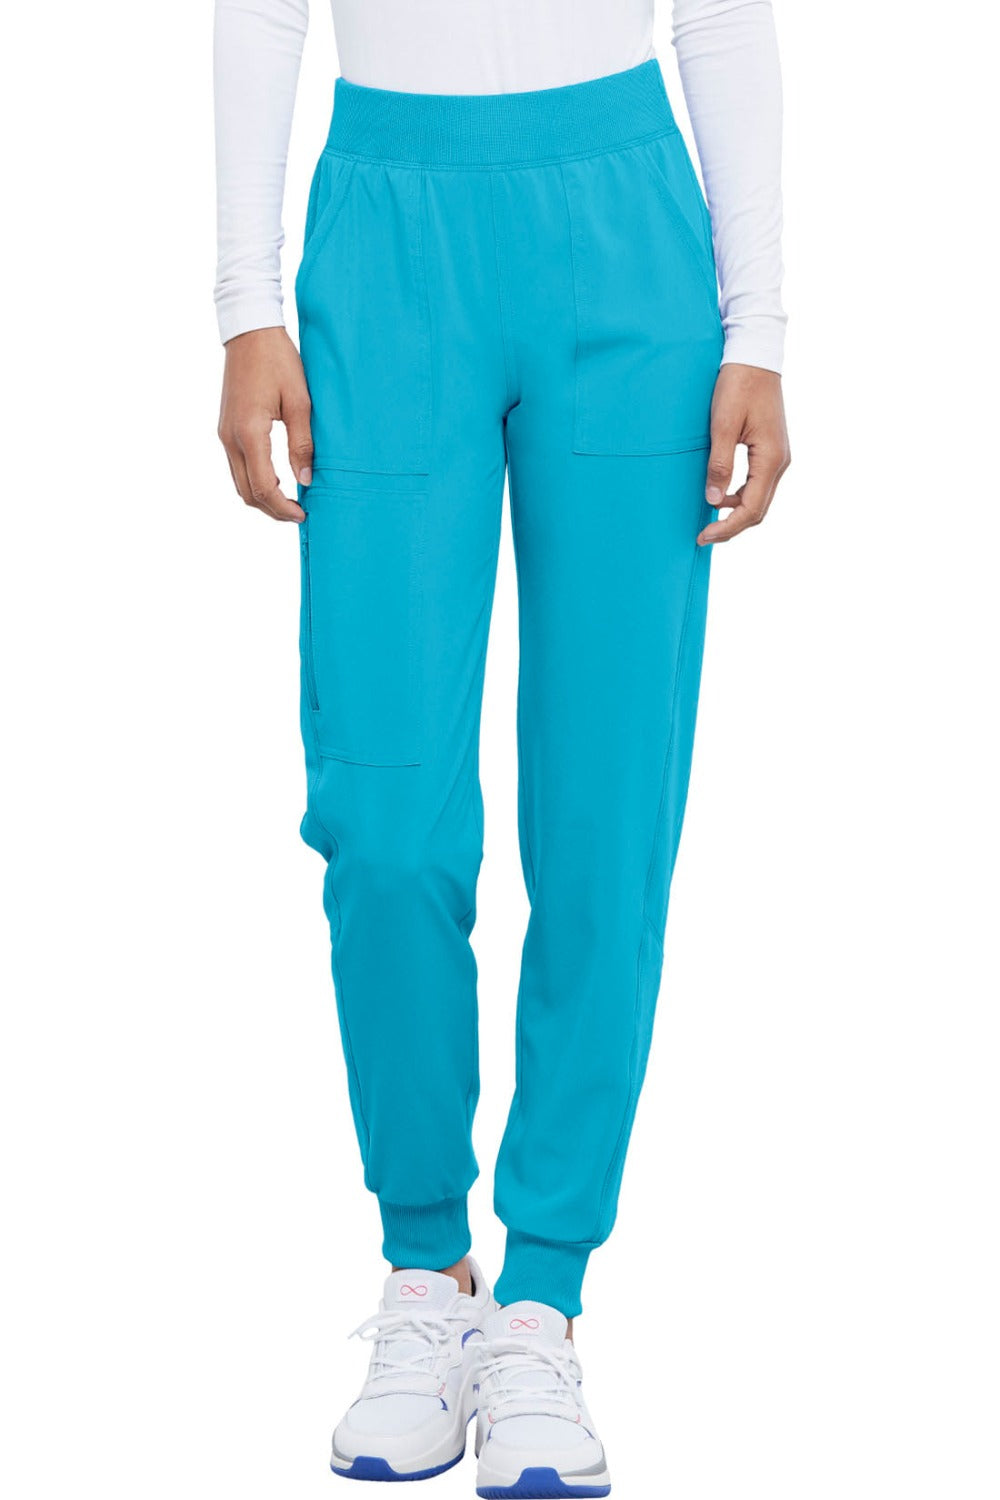 Cherokee Allura Petite Scrub Pant Pull On Jogger in Teal Blue at Parker's Clothing and Shoes.